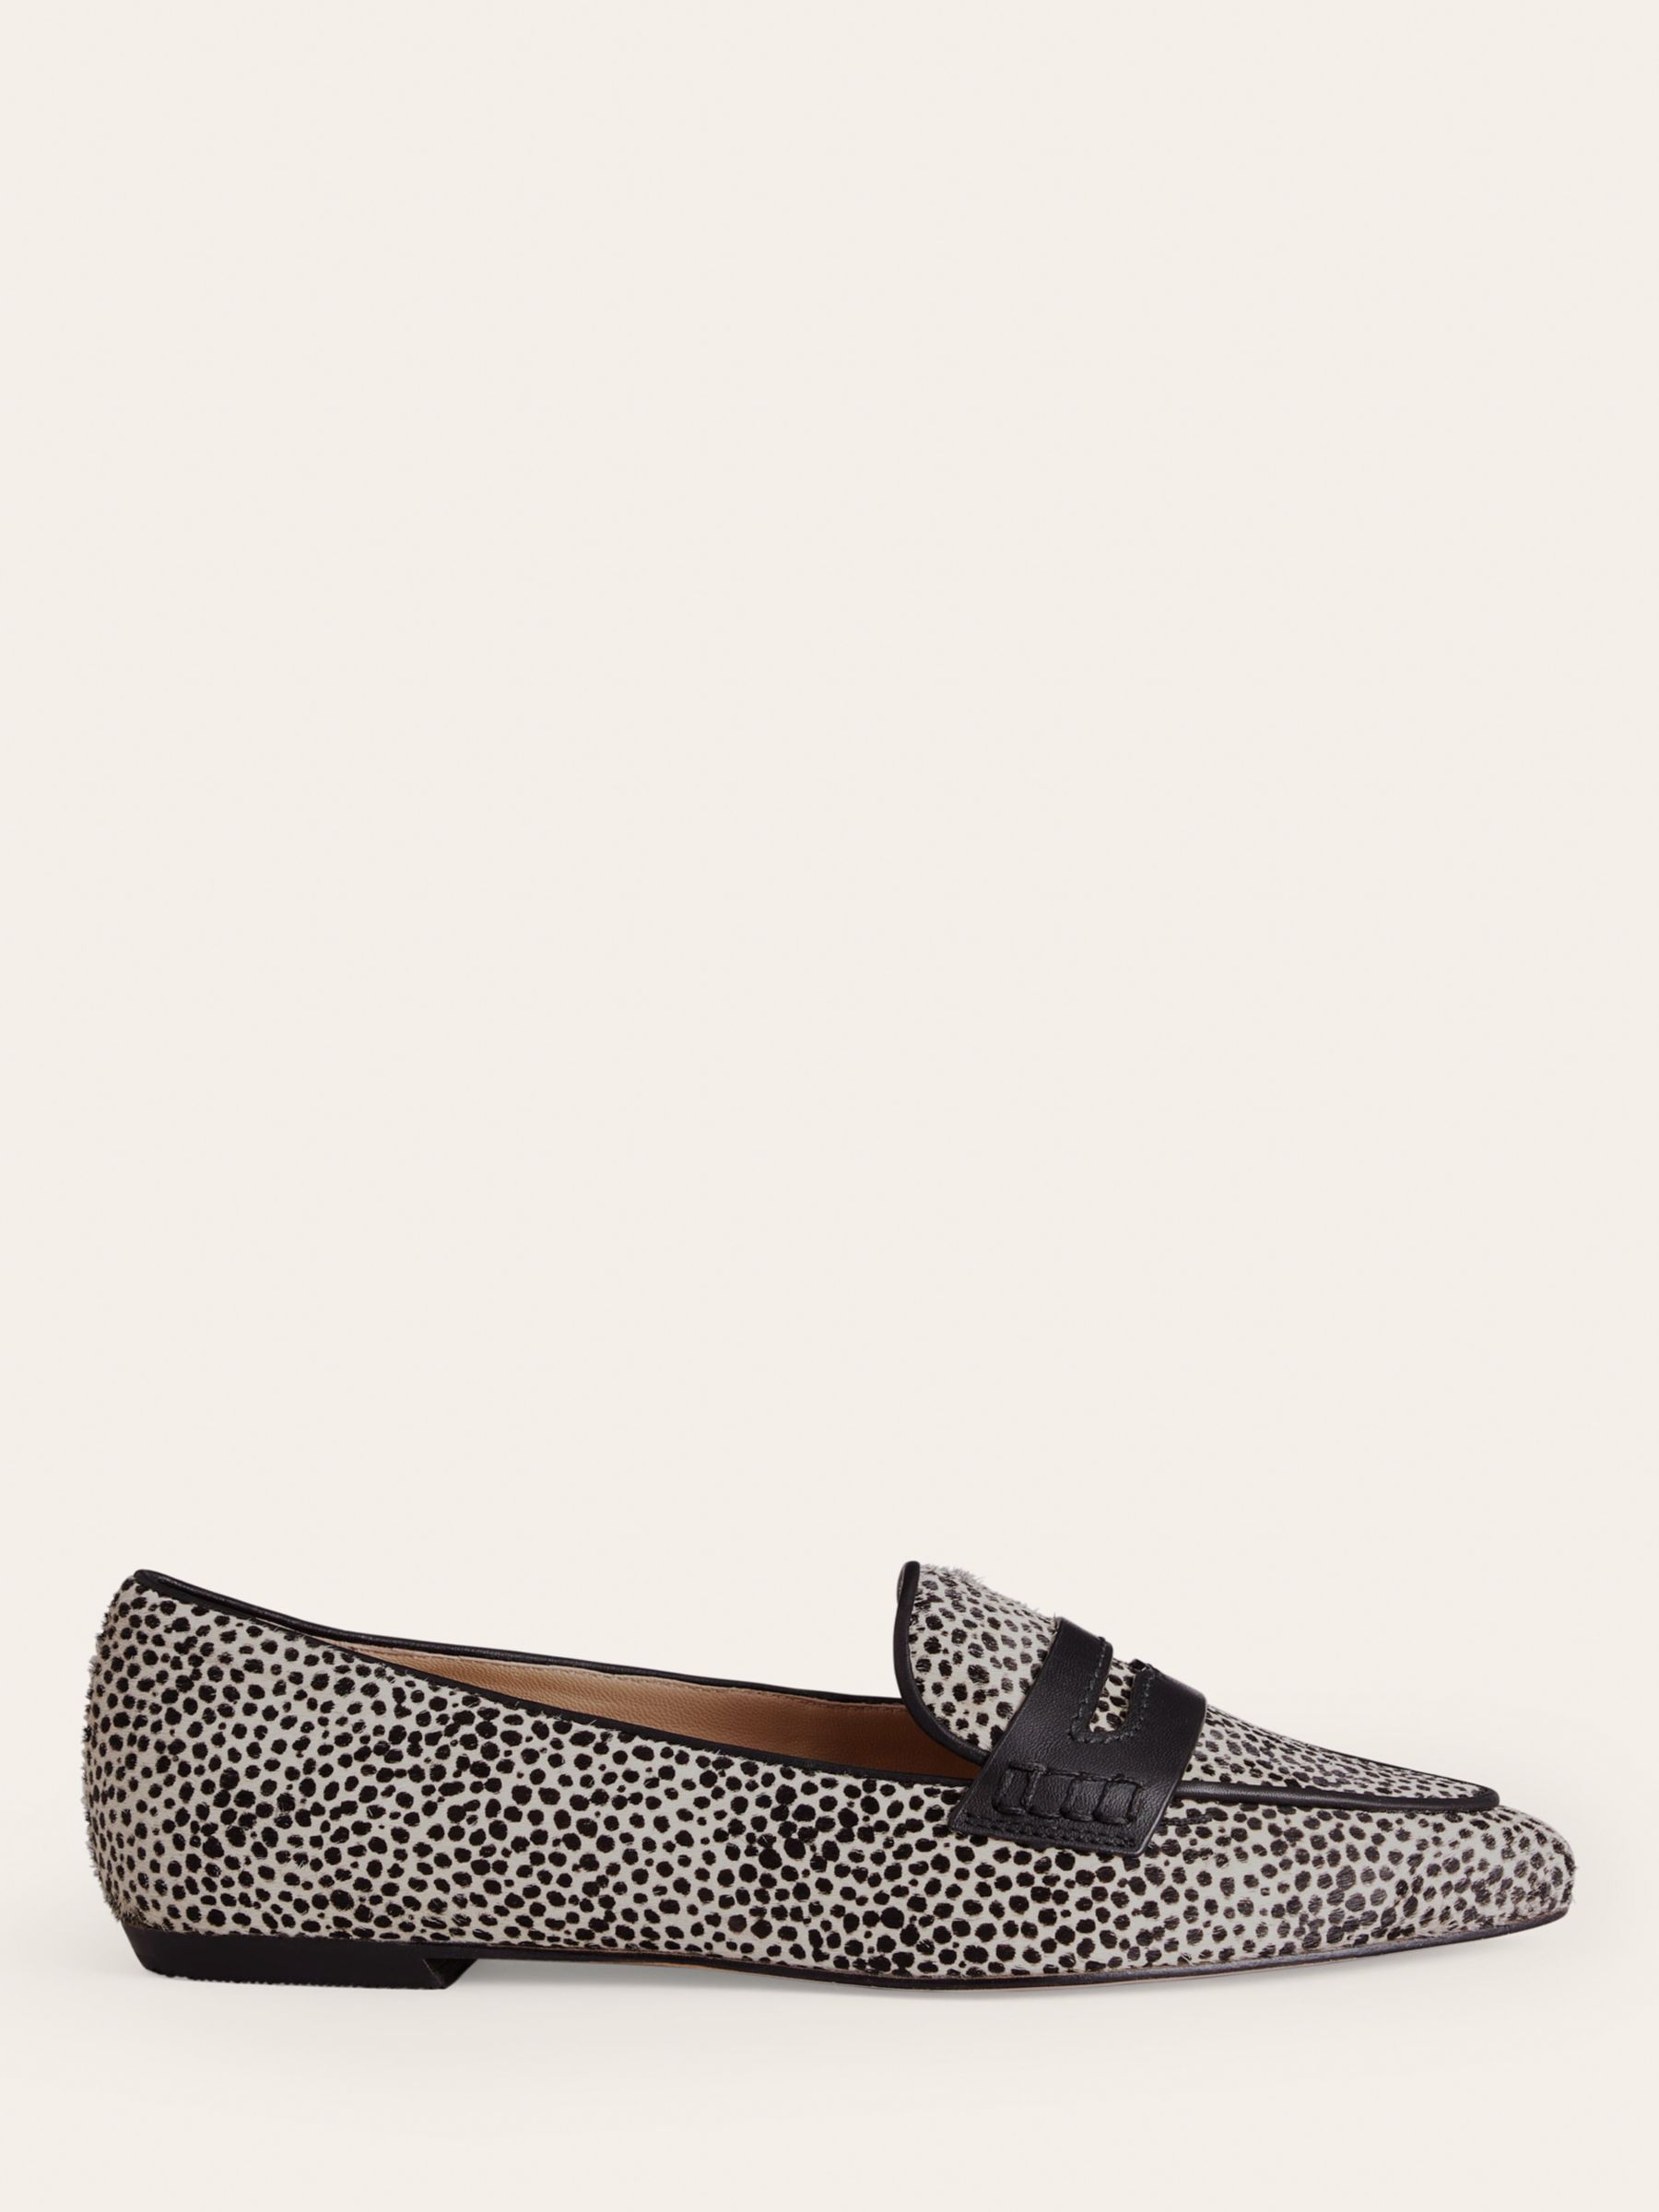 Boden Pointed Leather Loafers, Micro Dalmatian